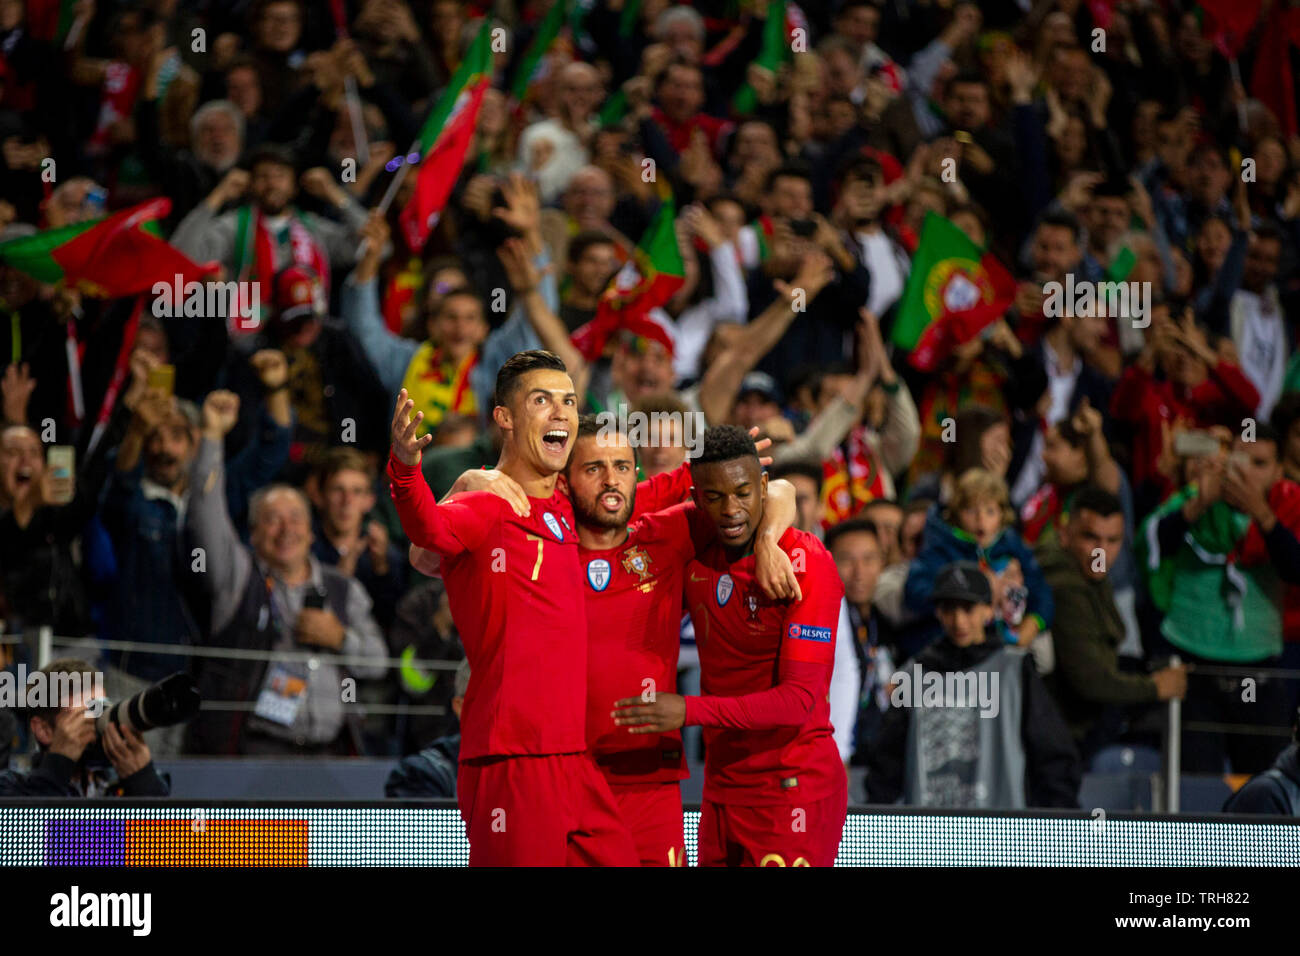 Portugal's player Cristiano Ronaldo (R), Bernardo Silva and Nélson Semedo is seen celebrating the second goal during the match for the UEFA Nations League Finals at Dragon Stadium on 5 June, 2019 in Porto, Portugal. ( Final score; Portugal 3:1 Switzerland ) Stock Photo